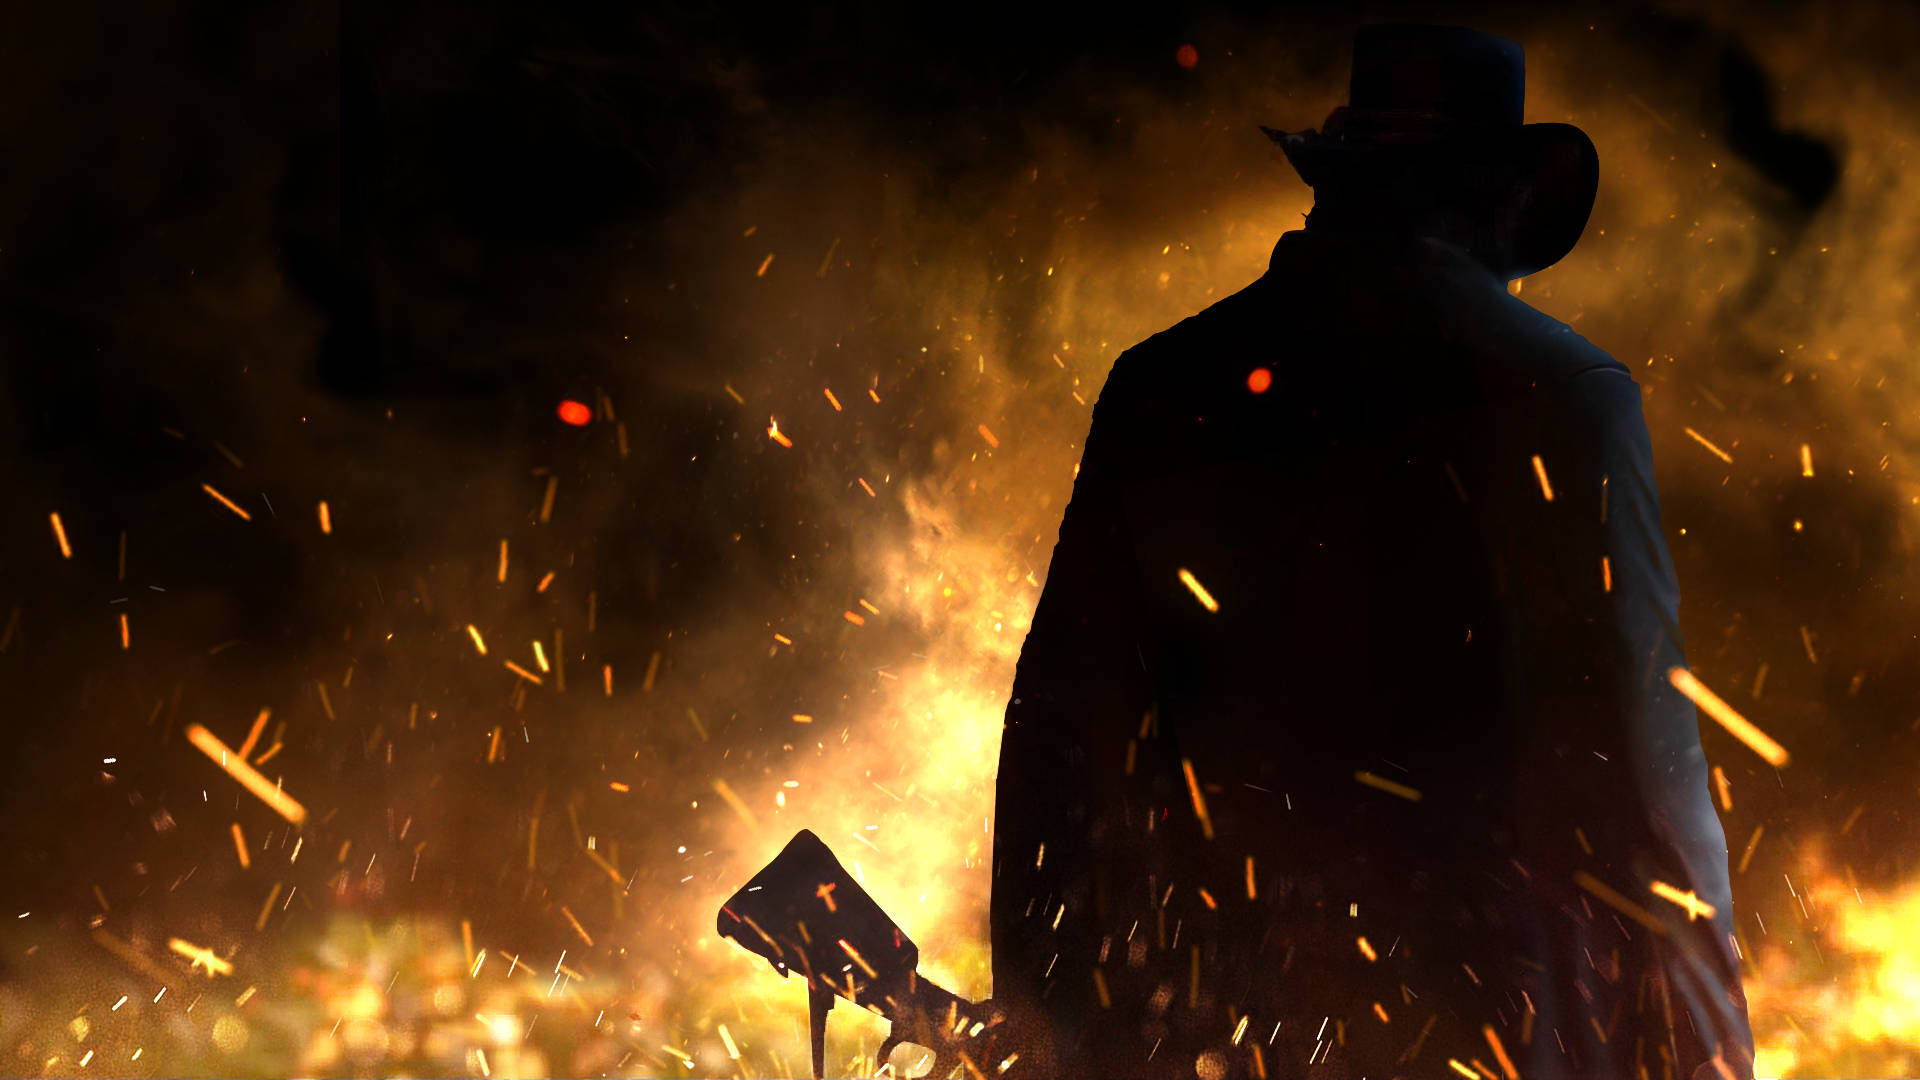 a man in a hat and a hat is standing in front of fire Wallpaper